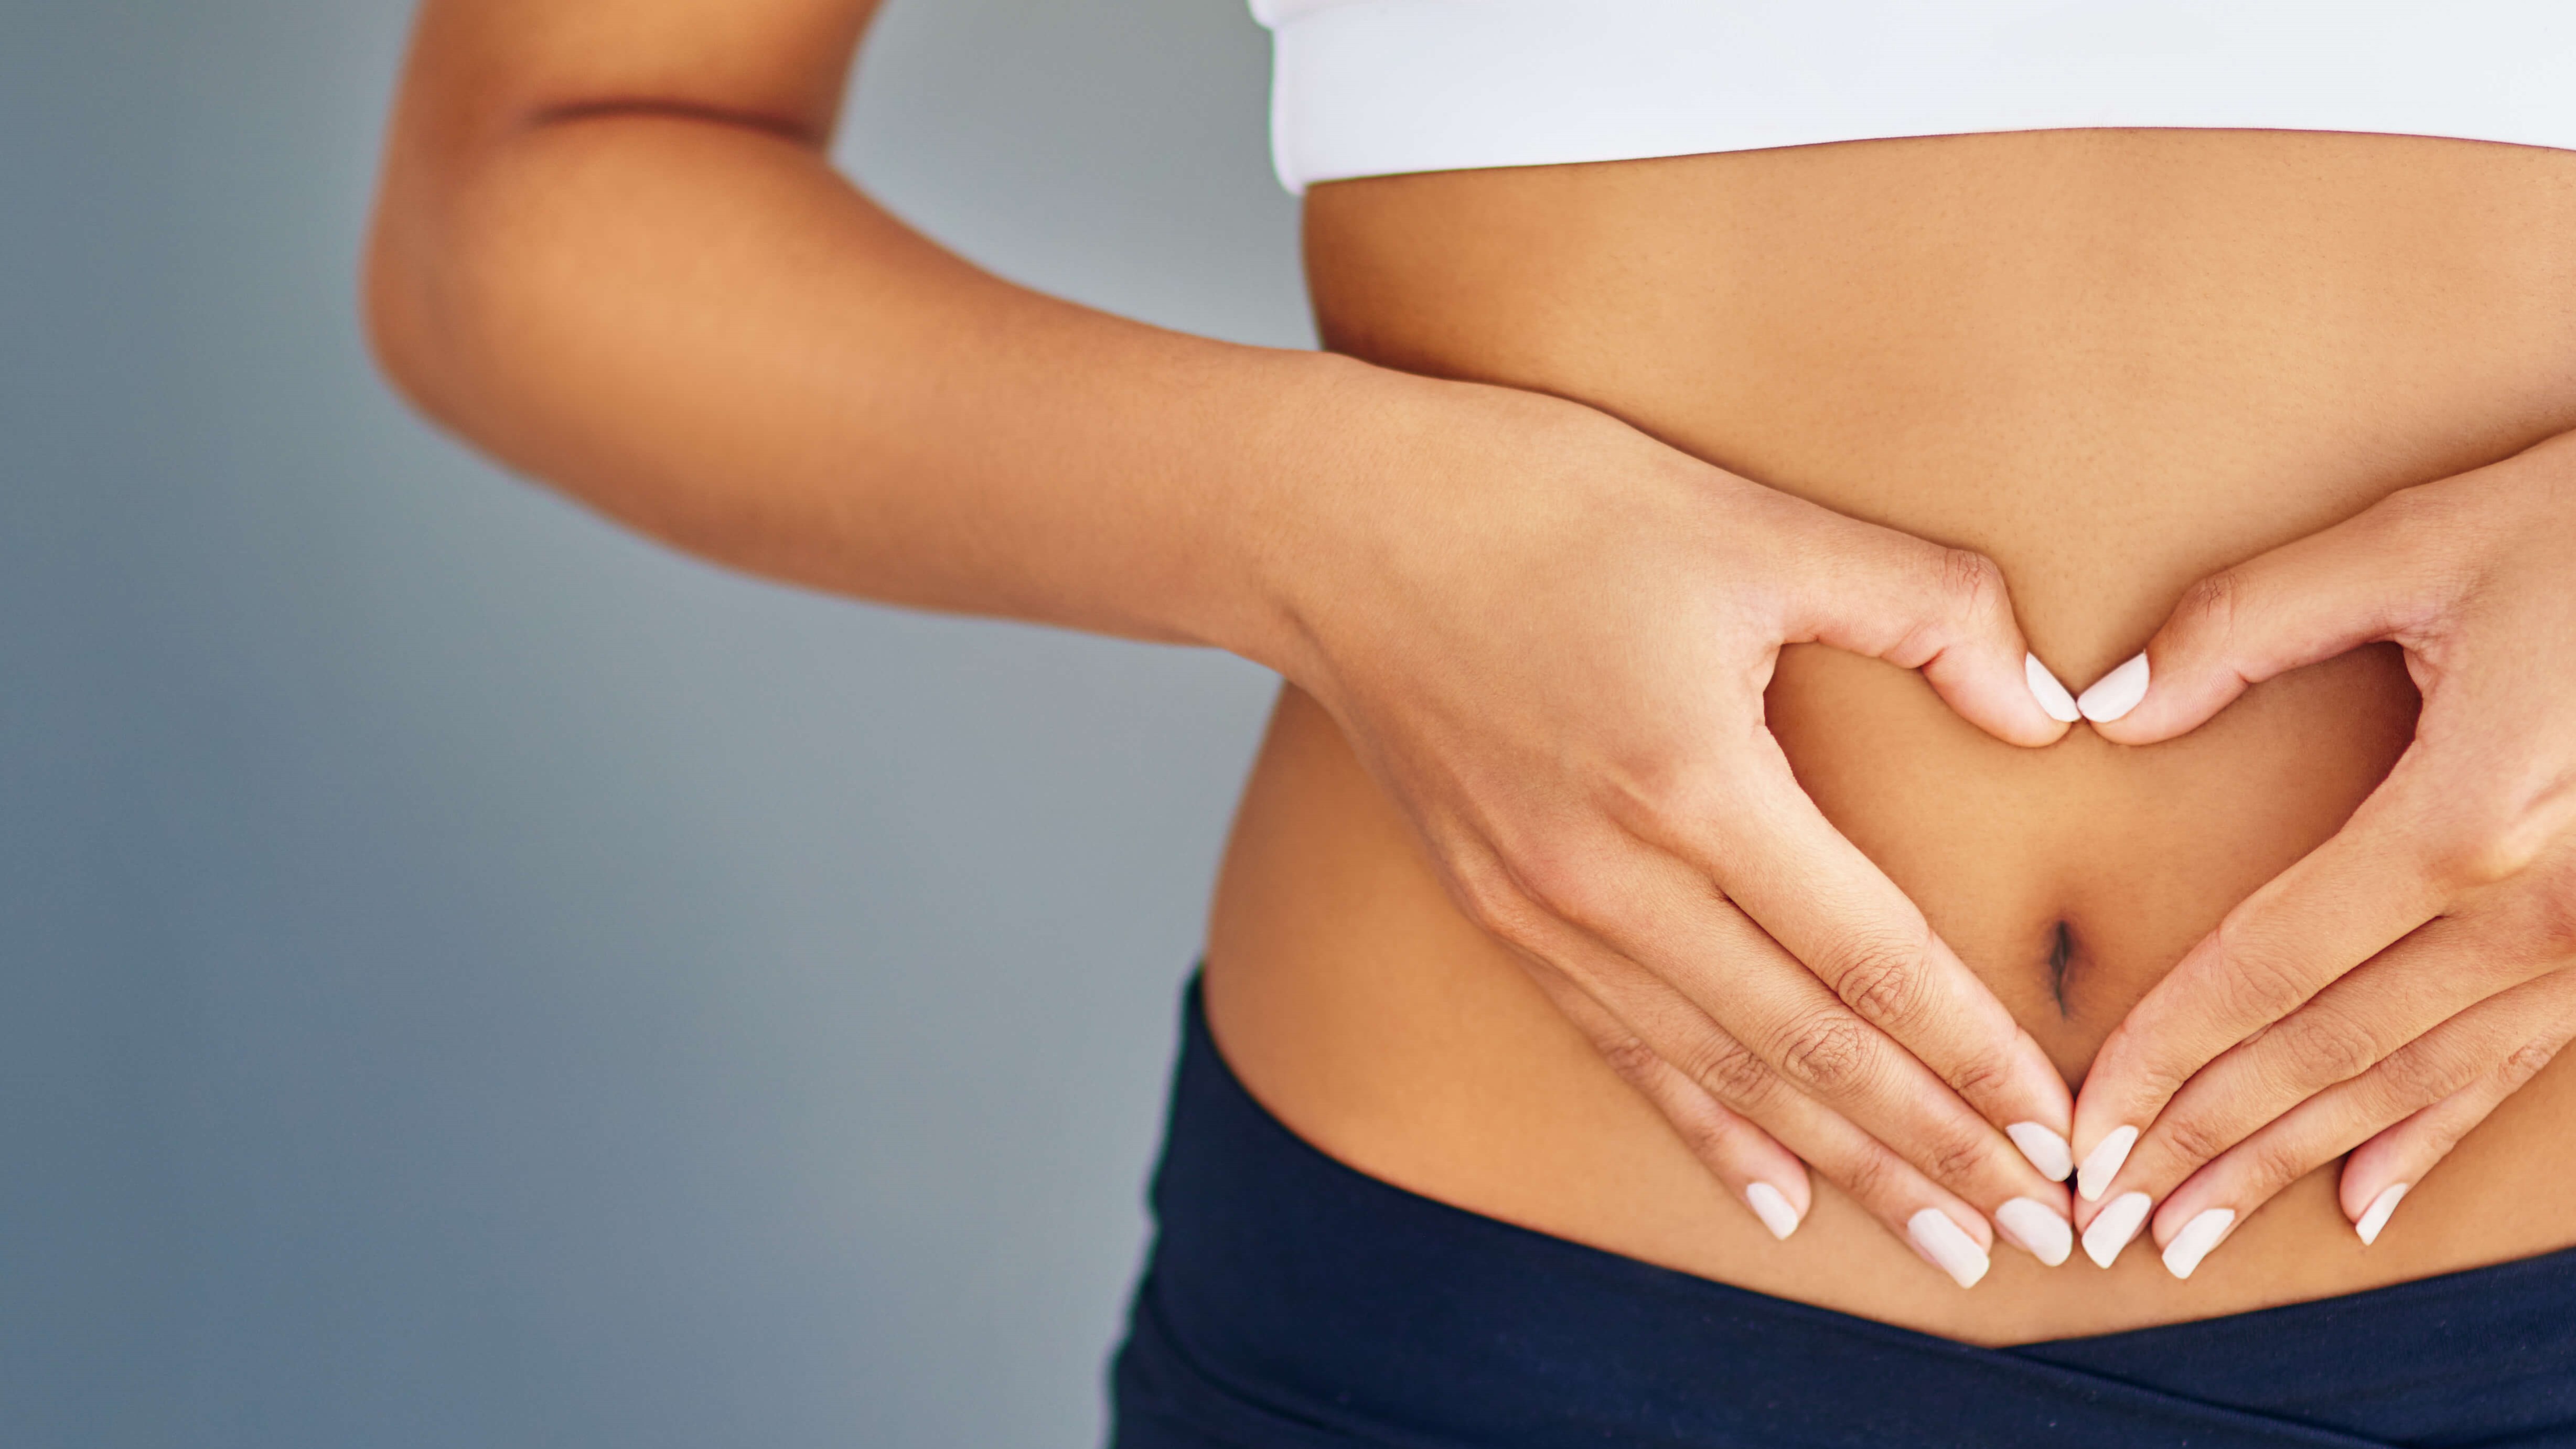 What You Need to Know About Using Stomach Wraps